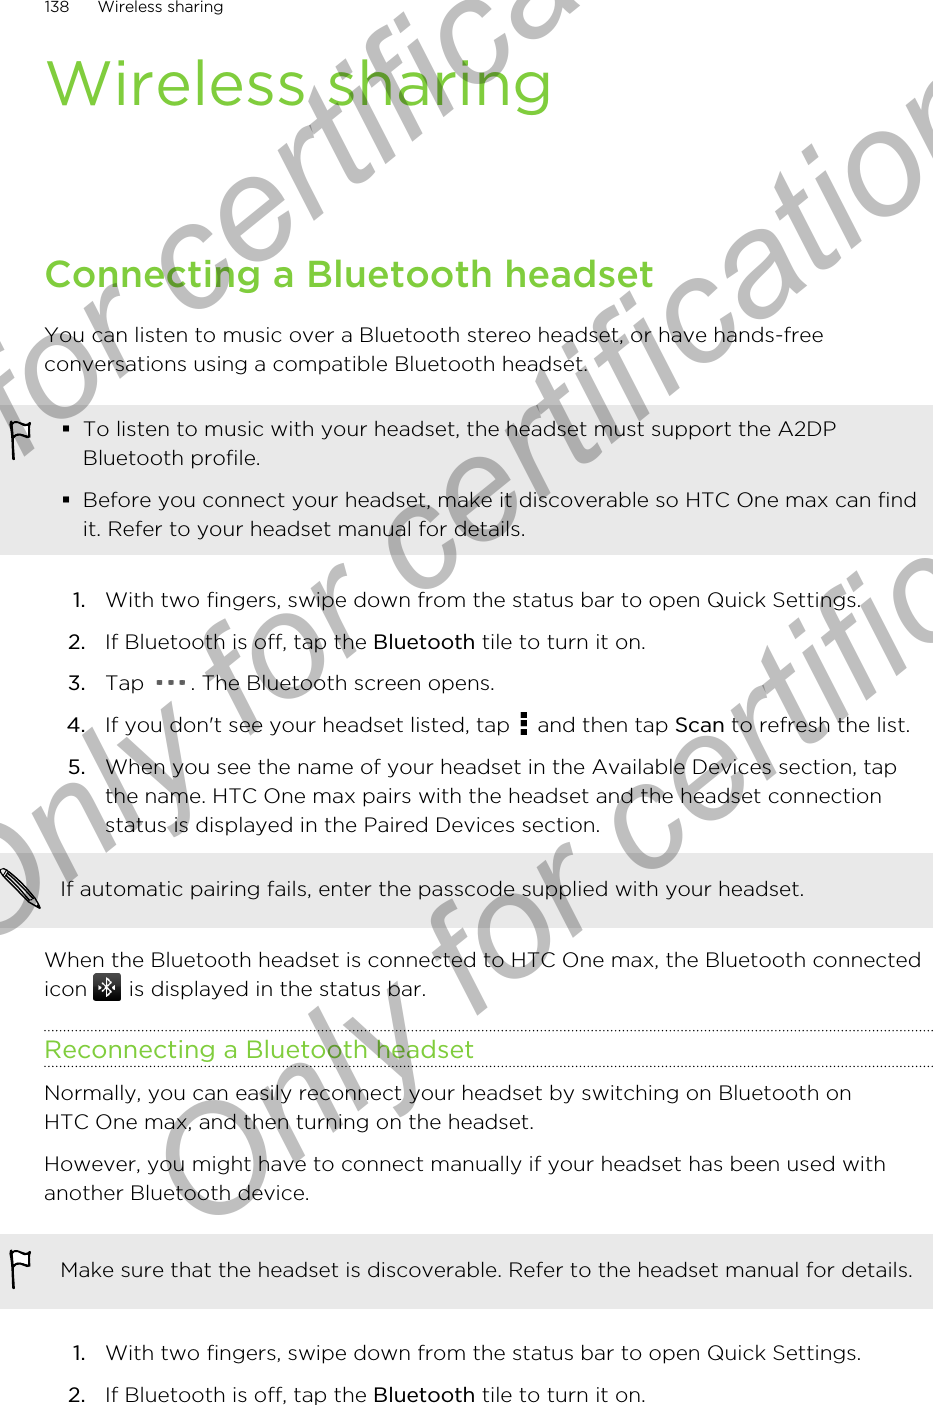 Wireless sharingConnecting a Bluetooth headsetYou can listen to music over a Bluetooth stereo headset, or have hands-freeconversations using a compatible Bluetooth headset.§To listen to music with your headset, the headset must support the A2DPBluetooth profile.§Before you connect your headset, make it discoverable so HTC One max can findit. Refer to your headset manual for details.1. With two fingers, swipe down from the status bar to open Quick Settings.2. If Bluetooth is off, tap the Bluetooth tile to turn it on.3. Tap  . The Bluetooth screen opens.4. If you don&apos;t see your headset listed, tap   and then tap Scan to refresh the list.5. When you see the name of your headset in the Available Devices section, tapthe name. HTC One max pairs with the headset and the headset connectionstatus is displayed in the Paired Devices section.If automatic pairing fails, enter the passcode supplied with your headset.When the Bluetooth headset is connected to HTC One max, the Bluetooth connectedicon   is displayed in the status bar.Reconnecting a Bluetooth headsetNormally, you can easily reconnect your headset by switching on Bluetooth onHTC One max, and then turning on the headset.However, you might have to connect manually if your headset has been used withanother Bluetooth device.Make sure that the headset is discoverable. Refer to the headset manual for details.1. With two fingers, swipe down from the status bar to open Quick Settings.2. If Bluetooth is off, tap the Bluetooth tile to turn it on.138 Wireless sharingOnly for certification  Only for certification  Only for certification